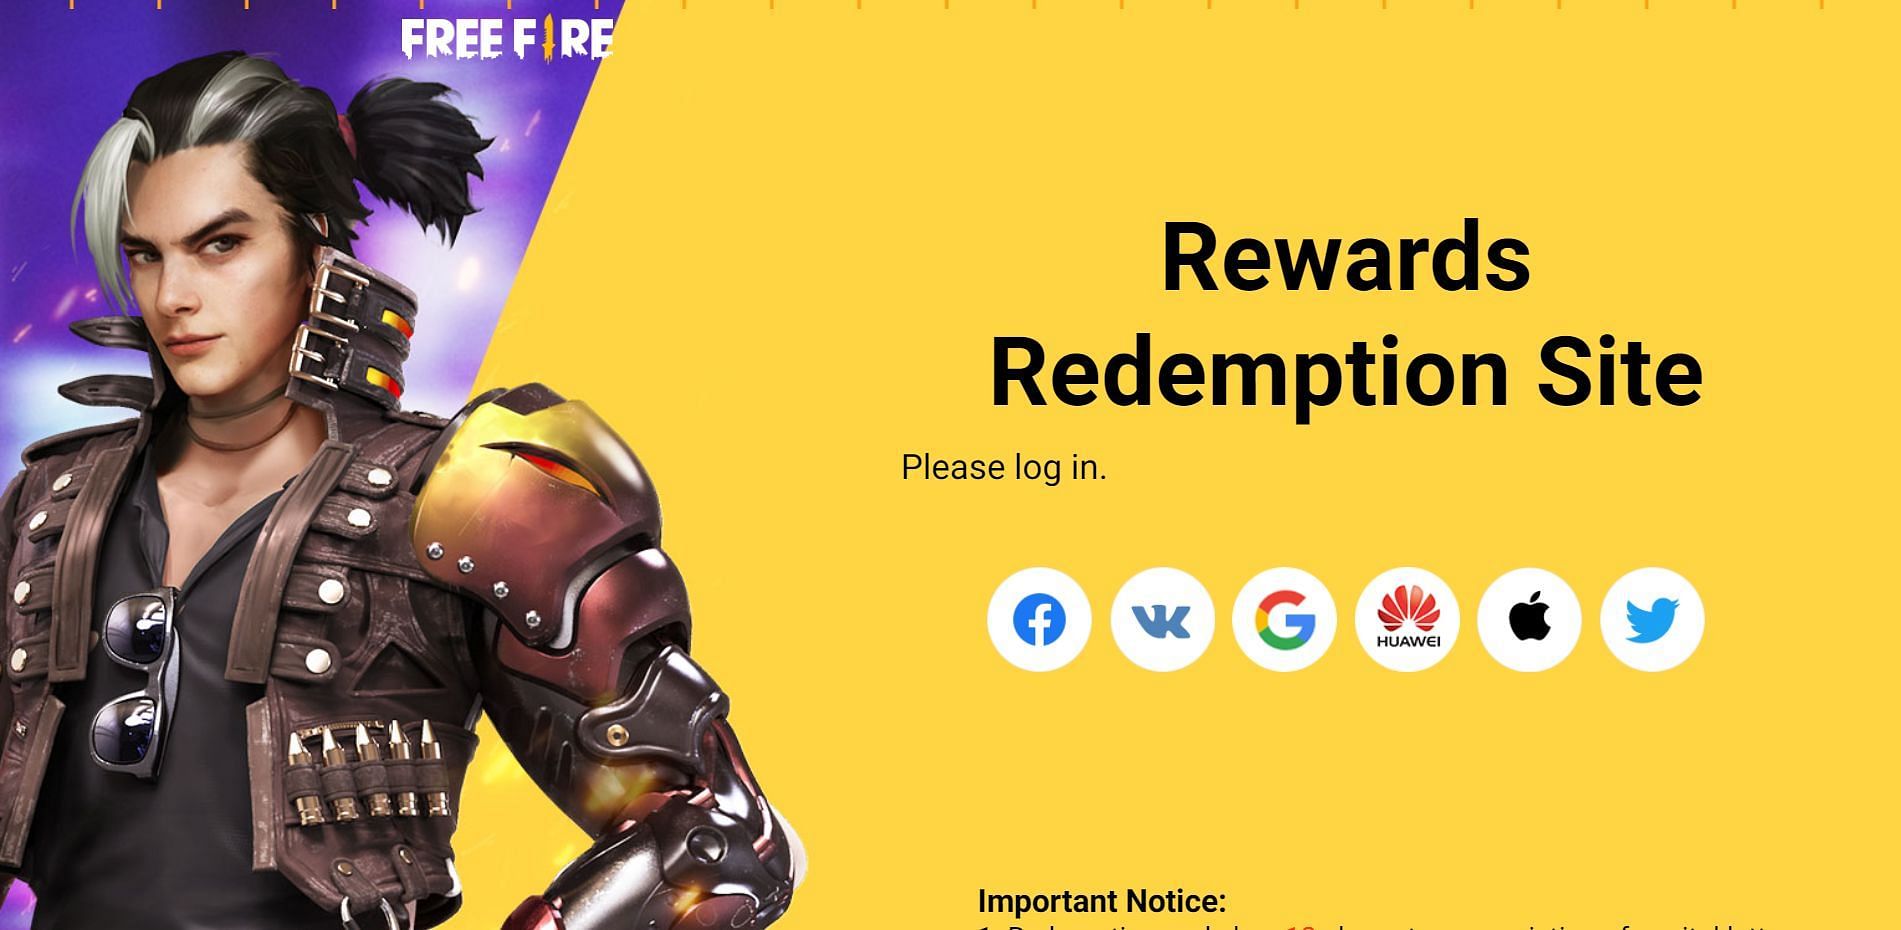 On the game&#039;s redemption site, they will need to log in through any one method (Image via Garena)